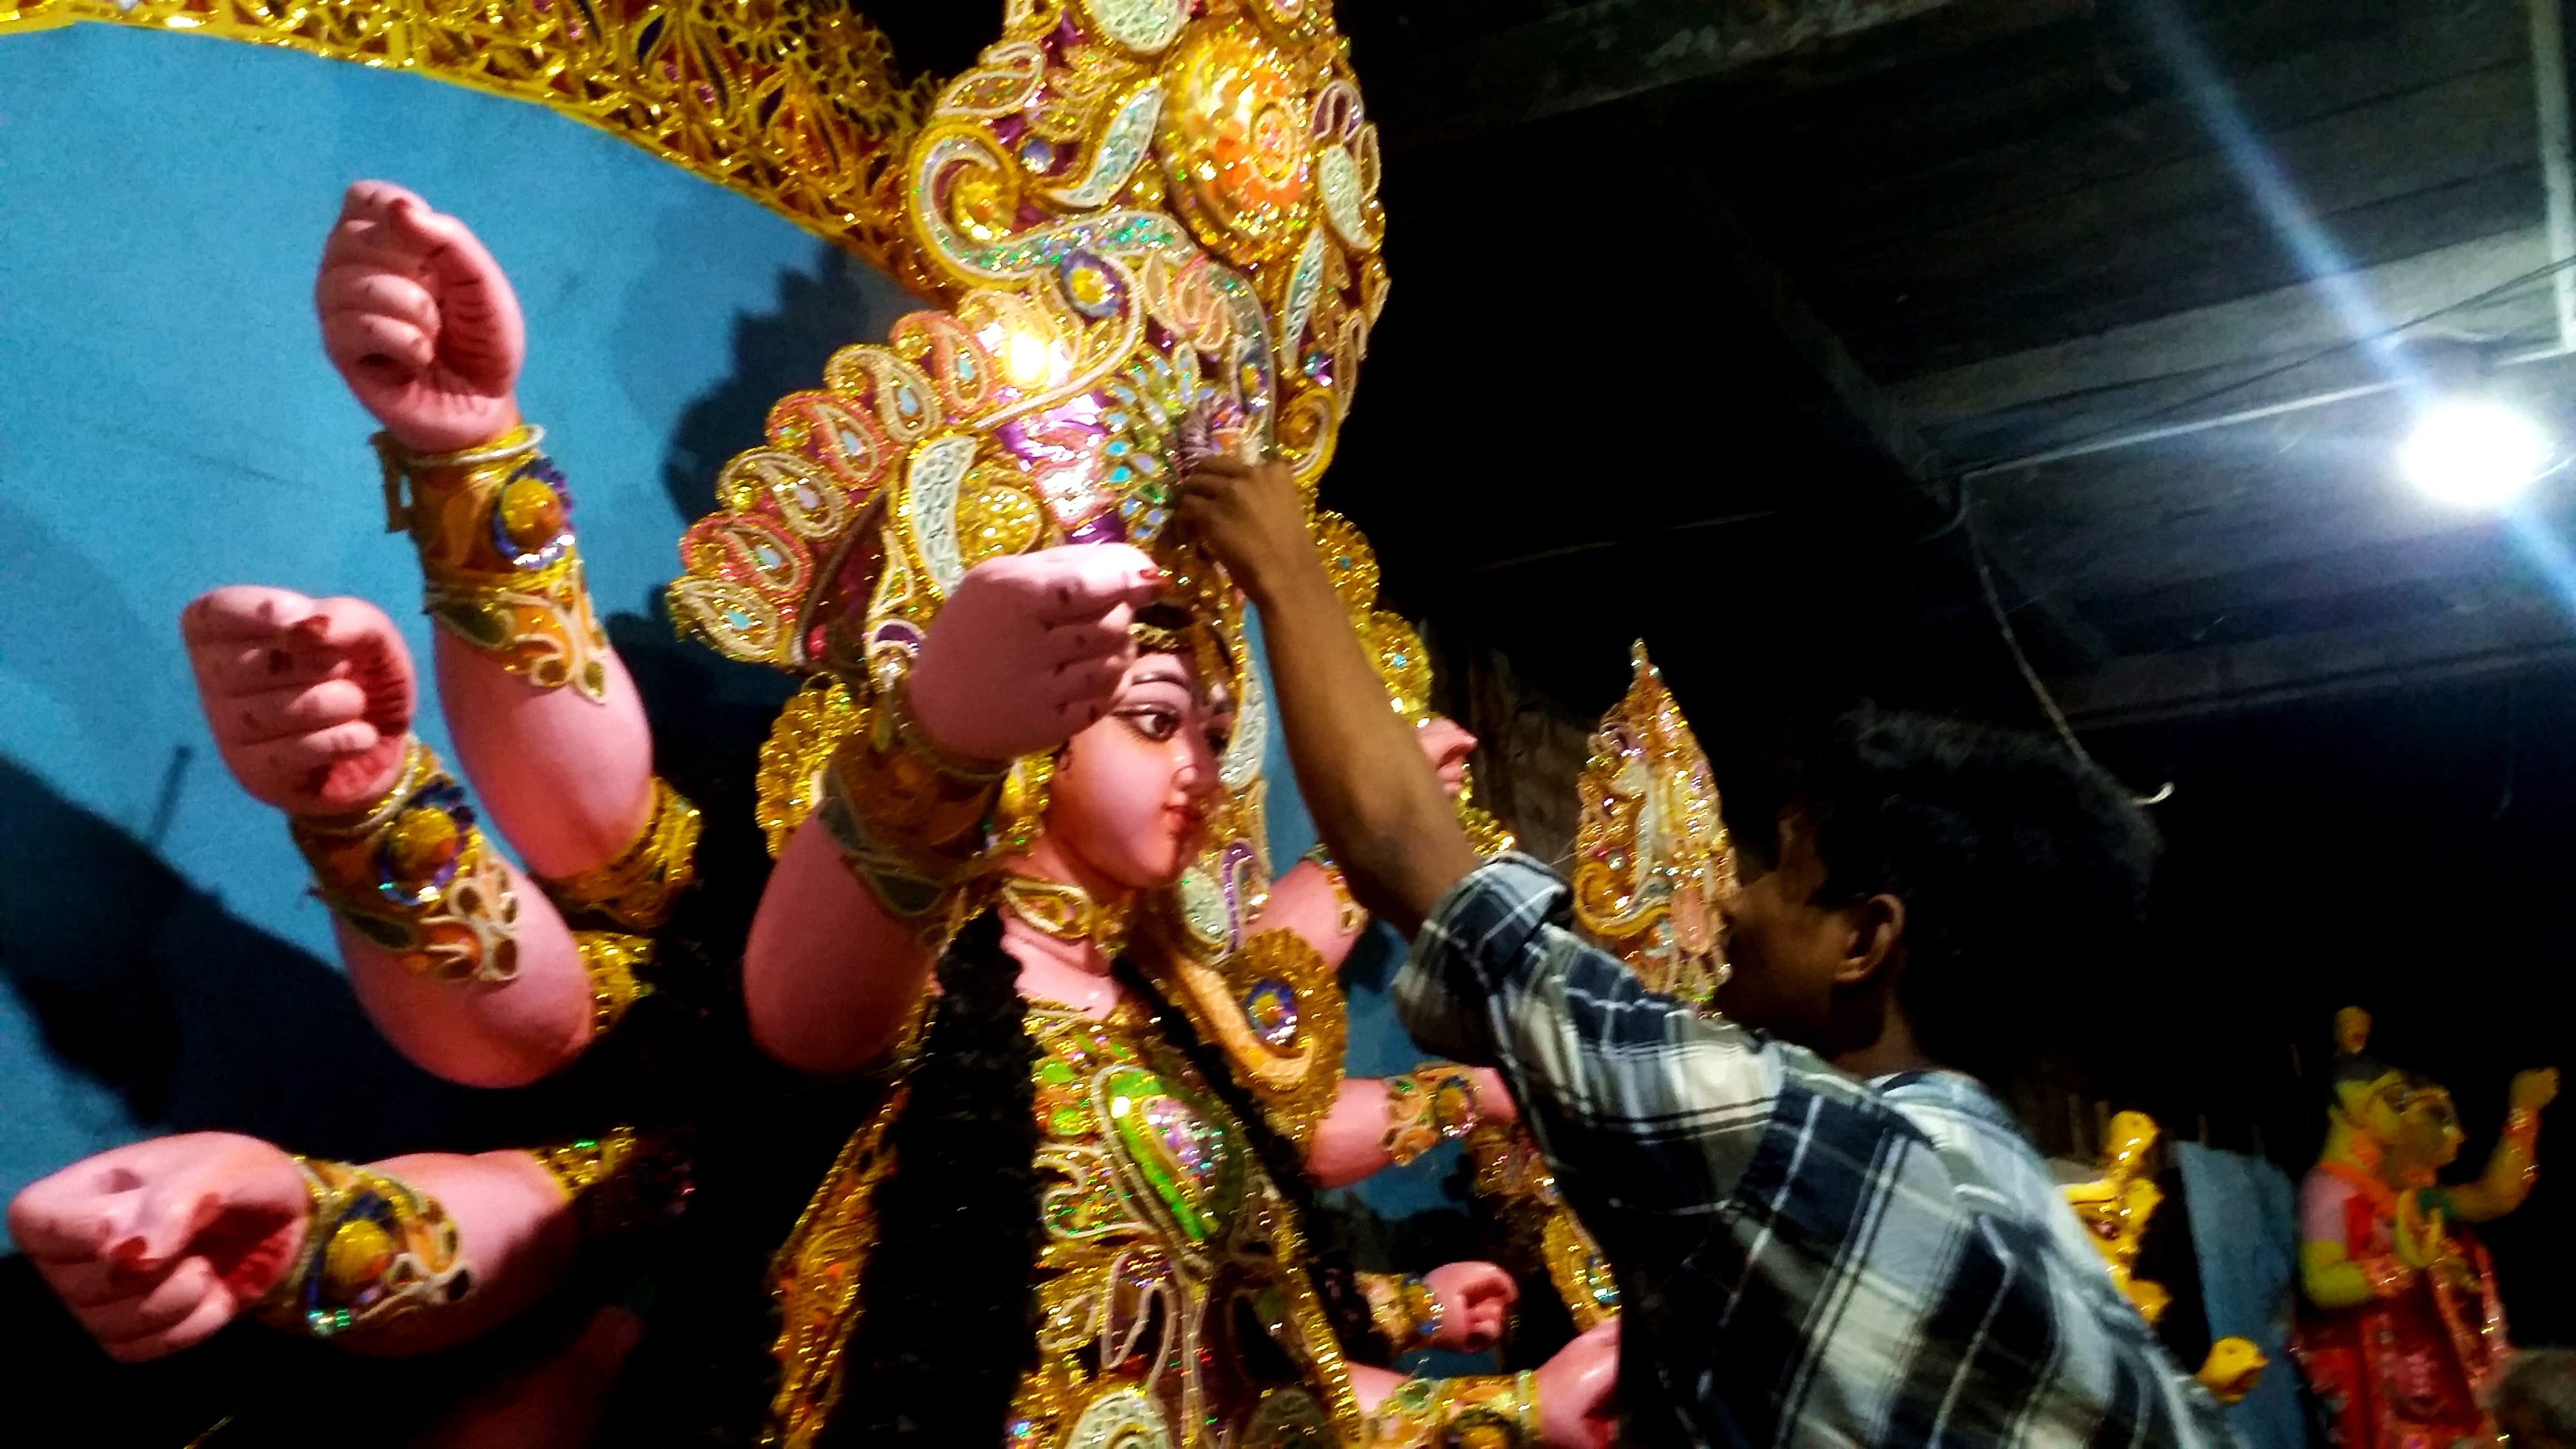 Potters and Durga Puja